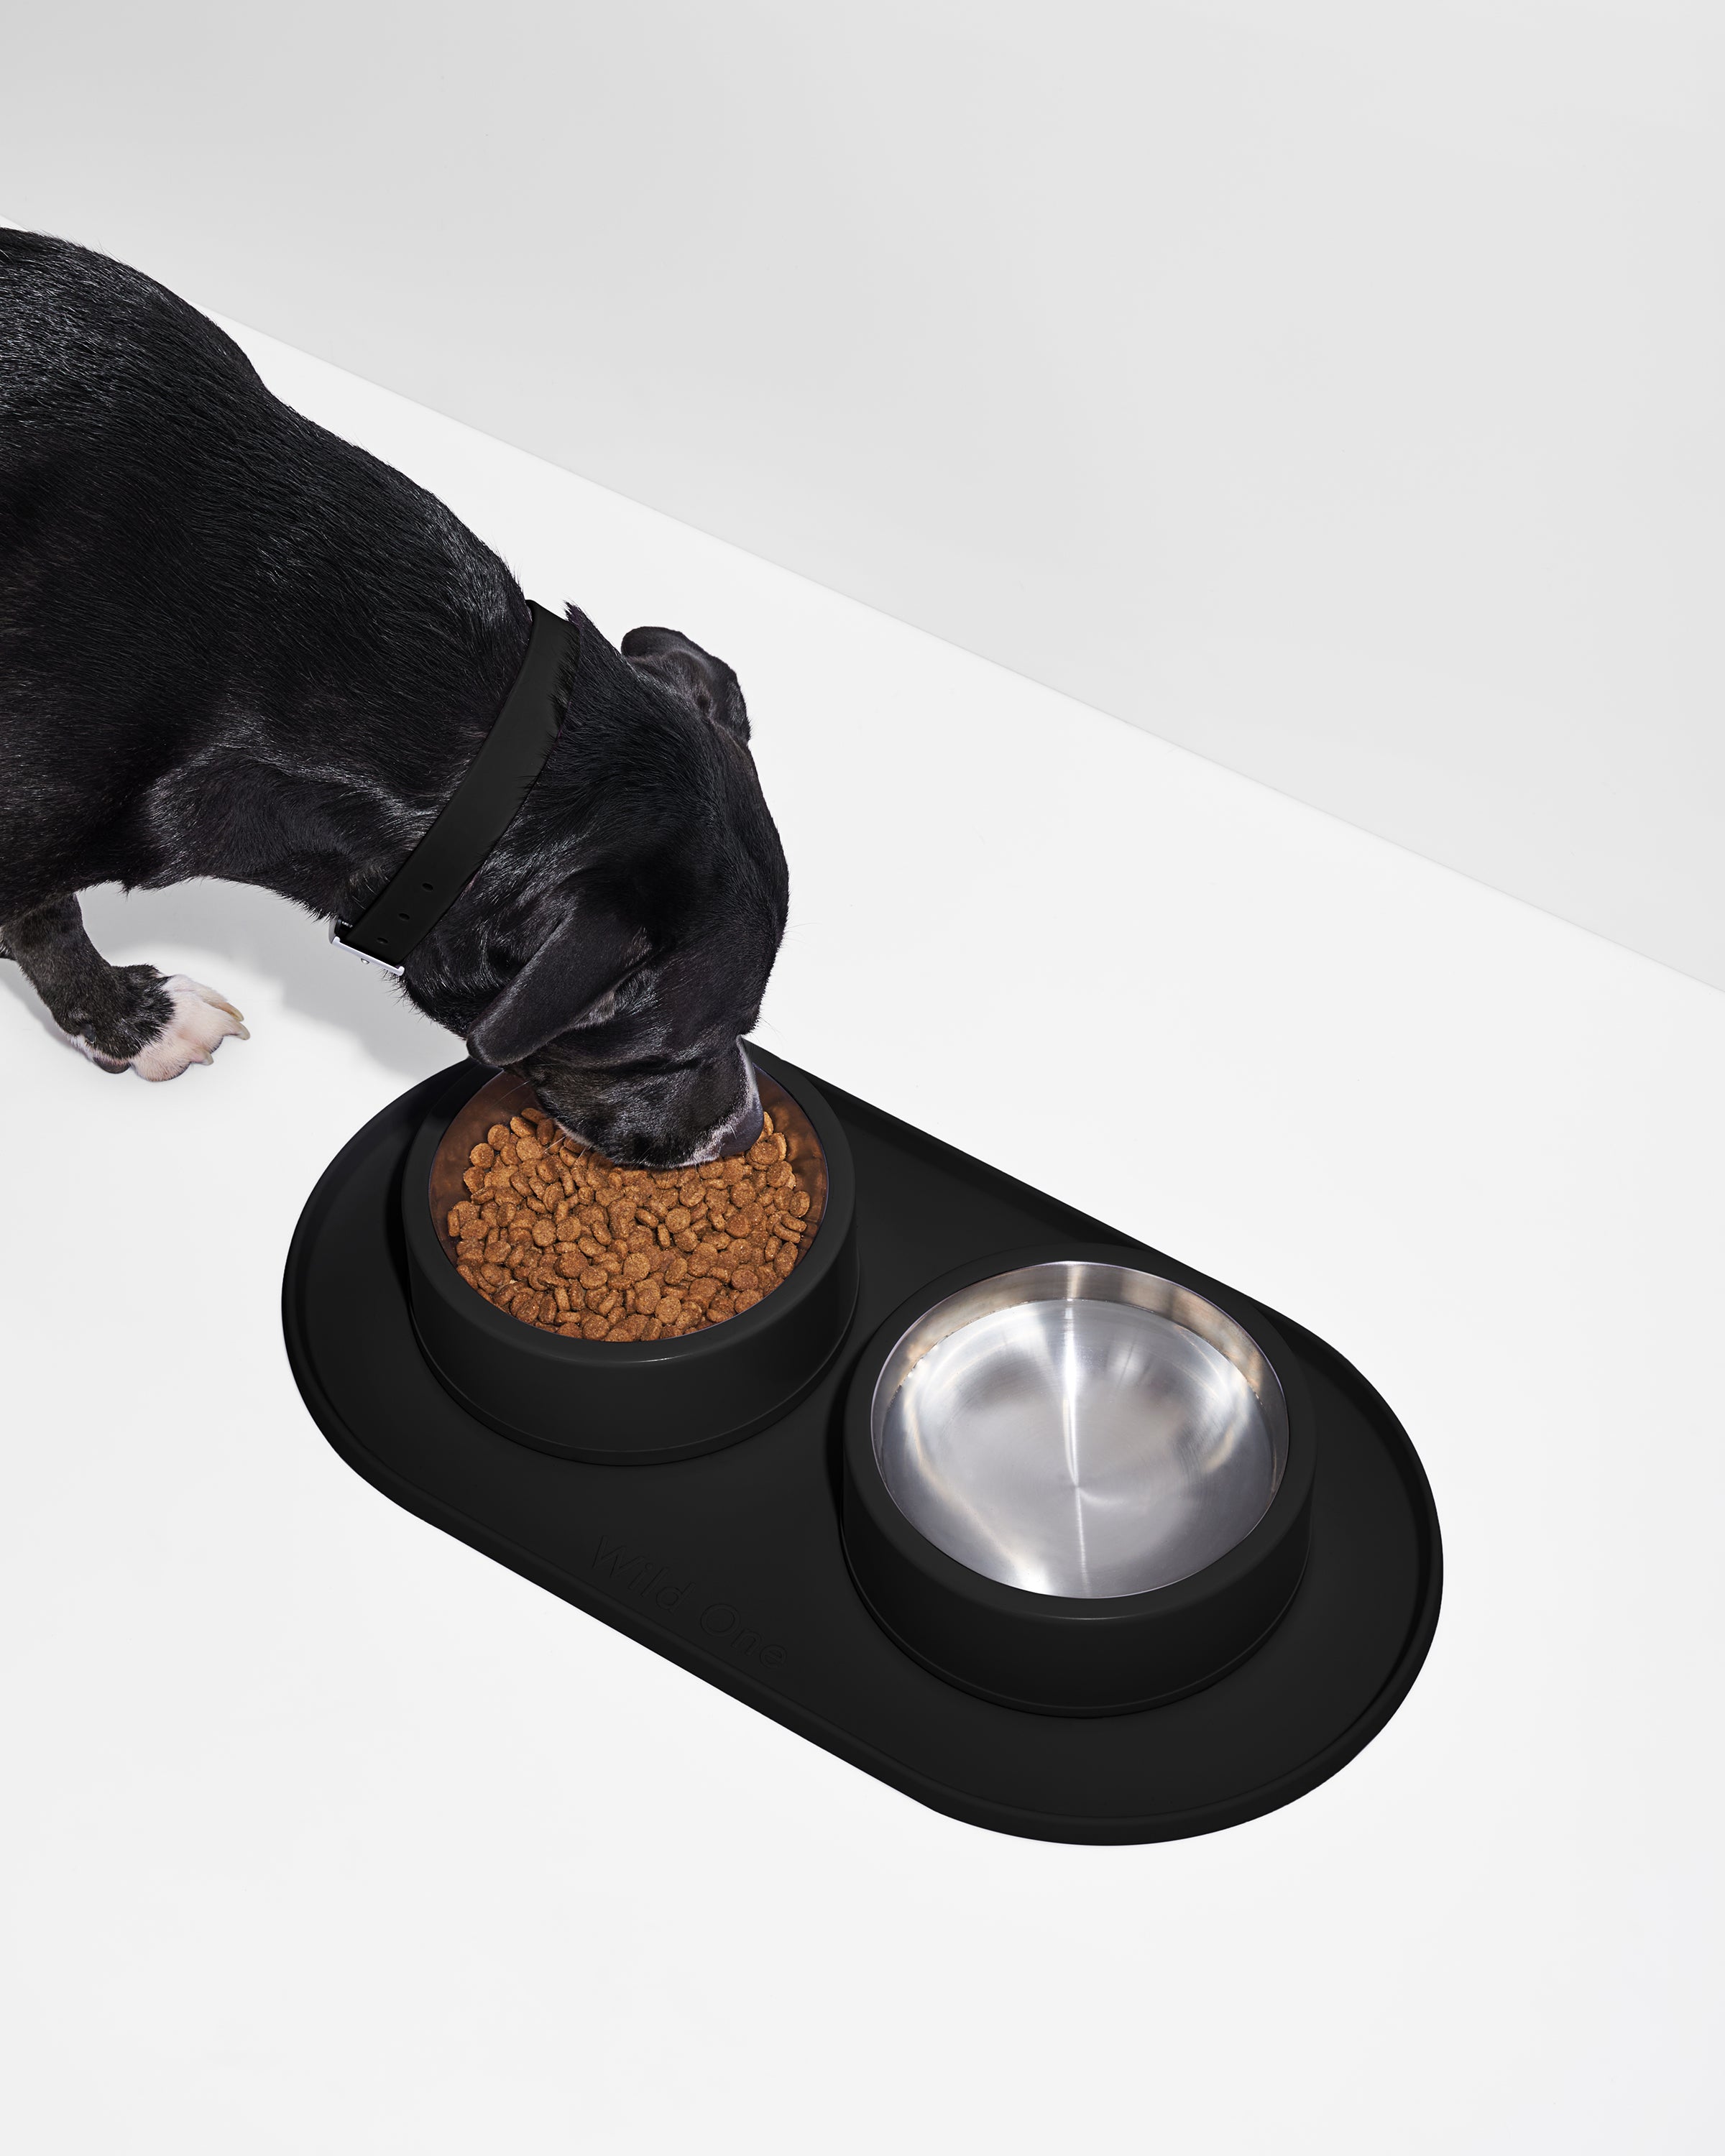 mDesign Silicone Pet Food & Water Bowl Feeding Mat for Dogs - 16 x 8 Small